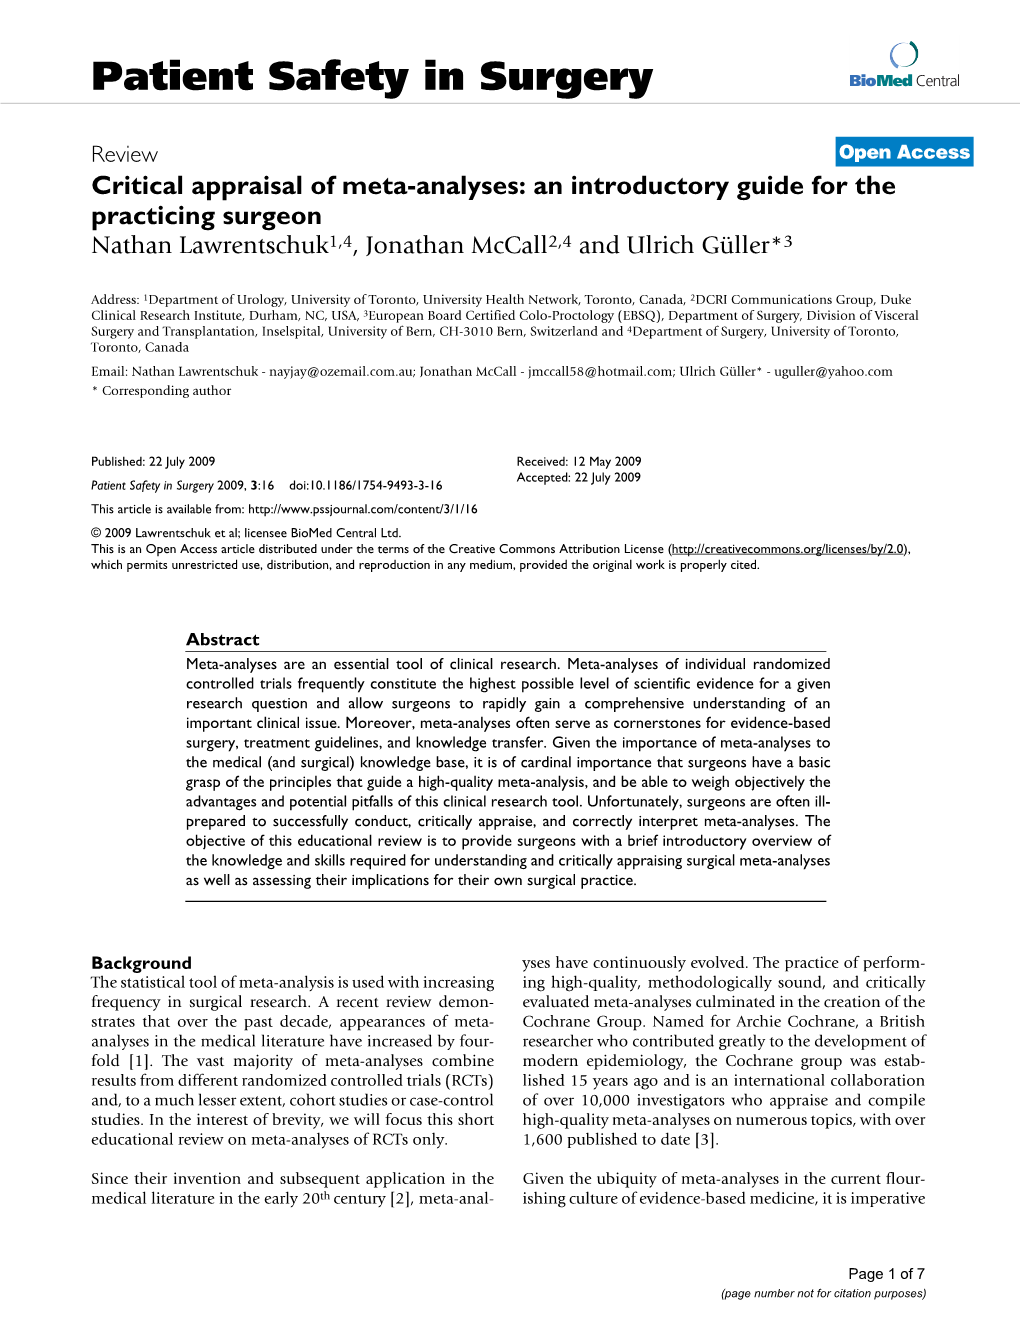 Critical Appraisal of Meta-Analyses: an Introductory Guide for the Practicing Surgeon Nathan Lawrentschuk1,4, Jonathan Mccall2,4 and Ulrich Güller*3